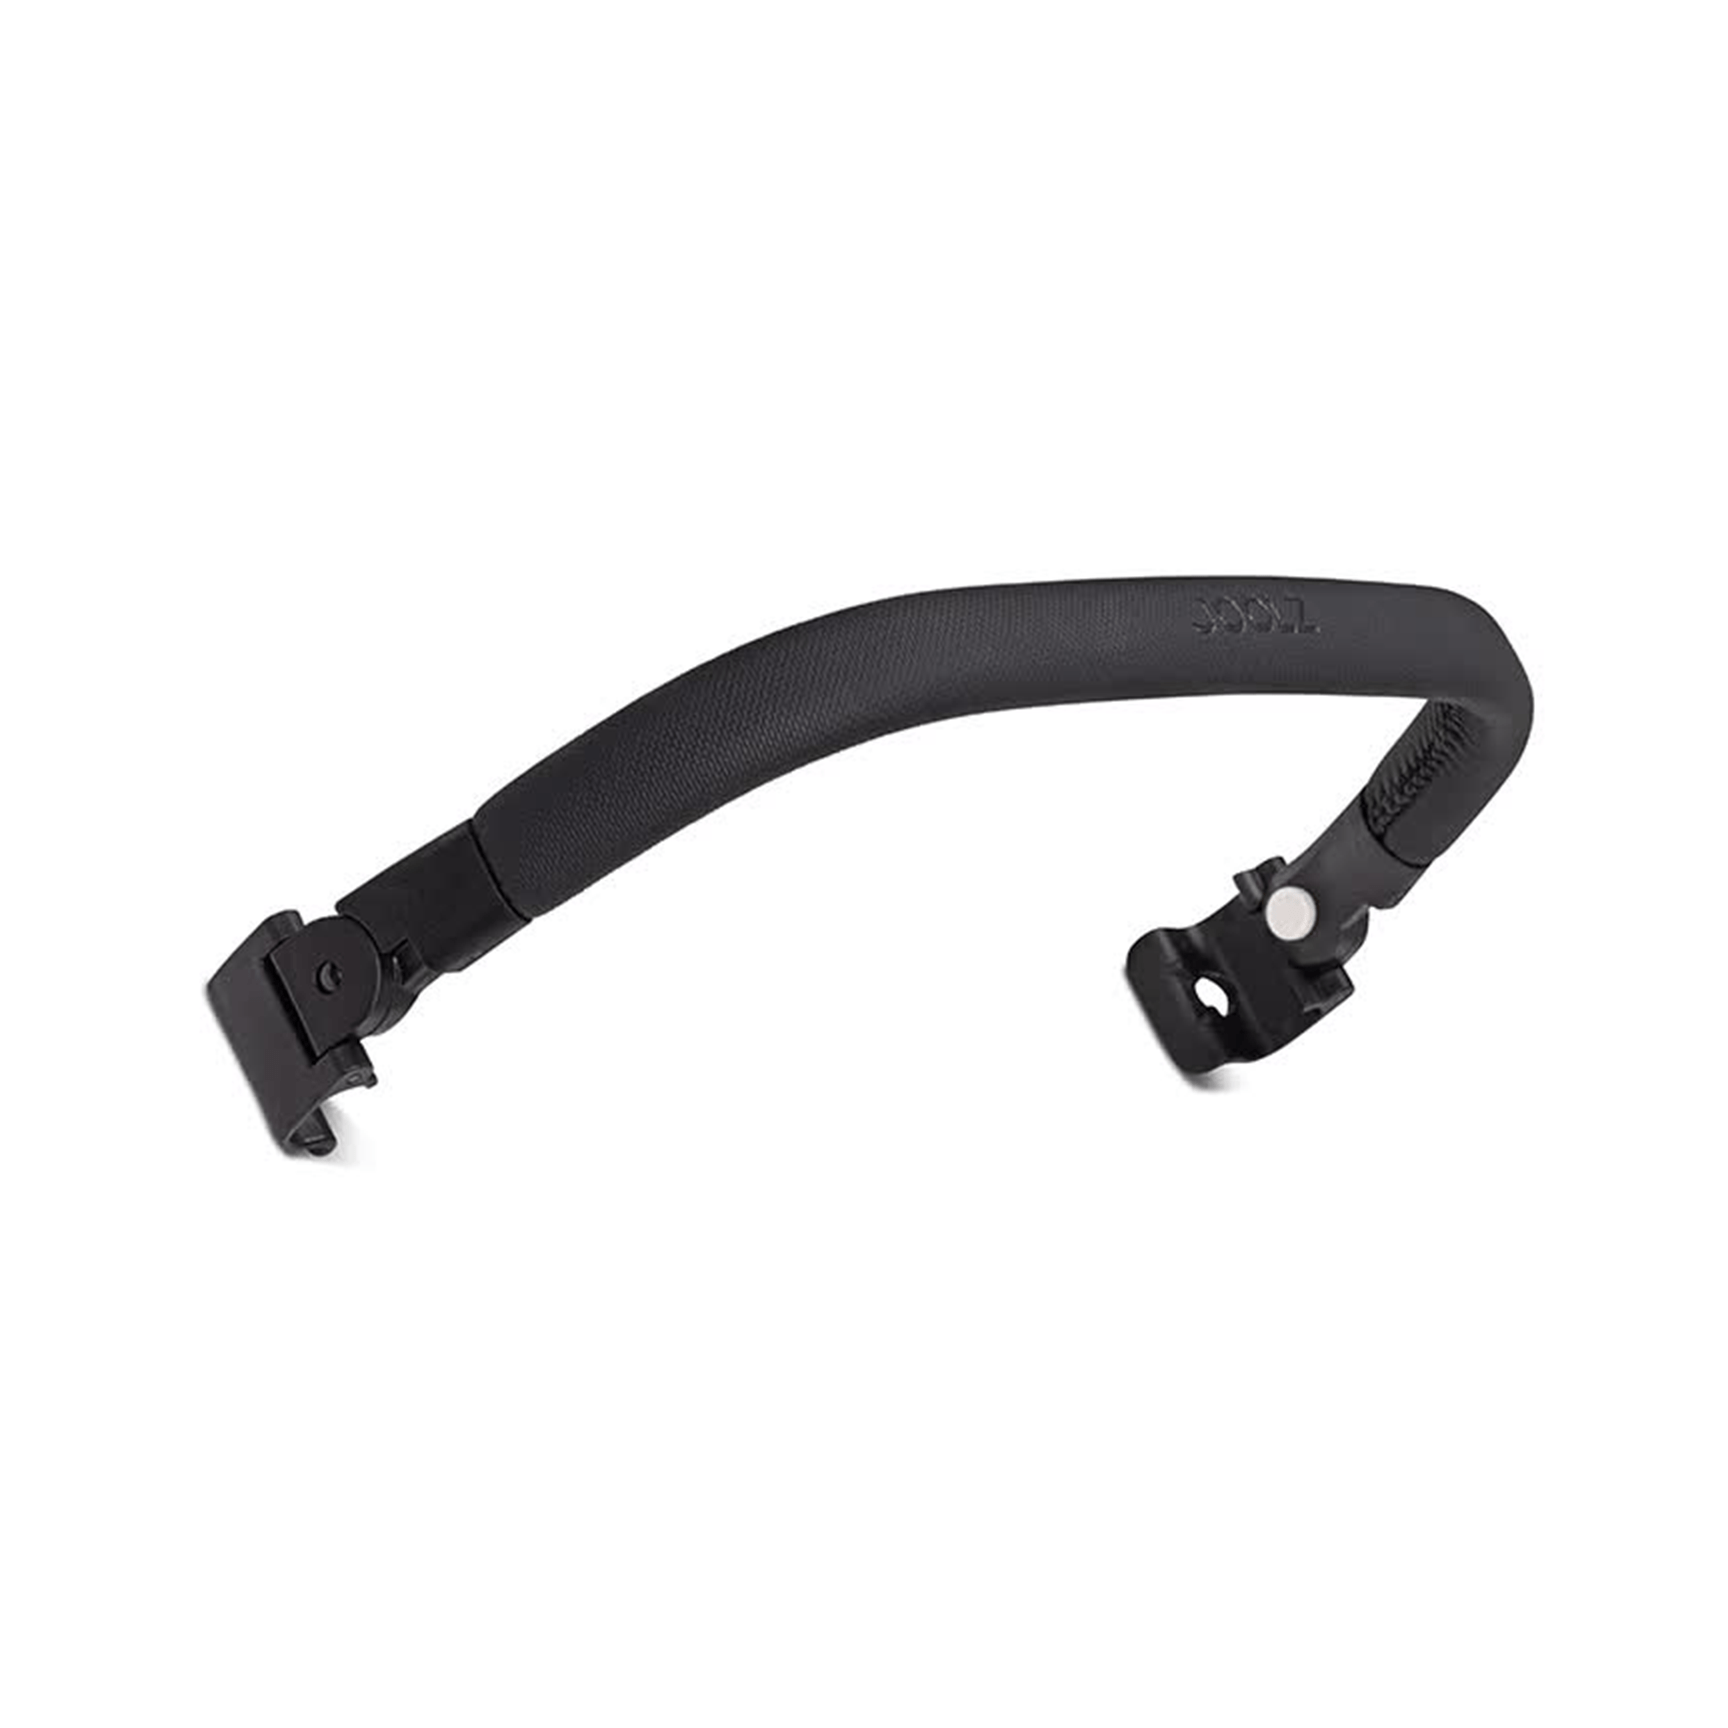 Joolz Aer+ Foldable Bumper Bar in Black Carbon Buggy Accessories 310130 8715688076736